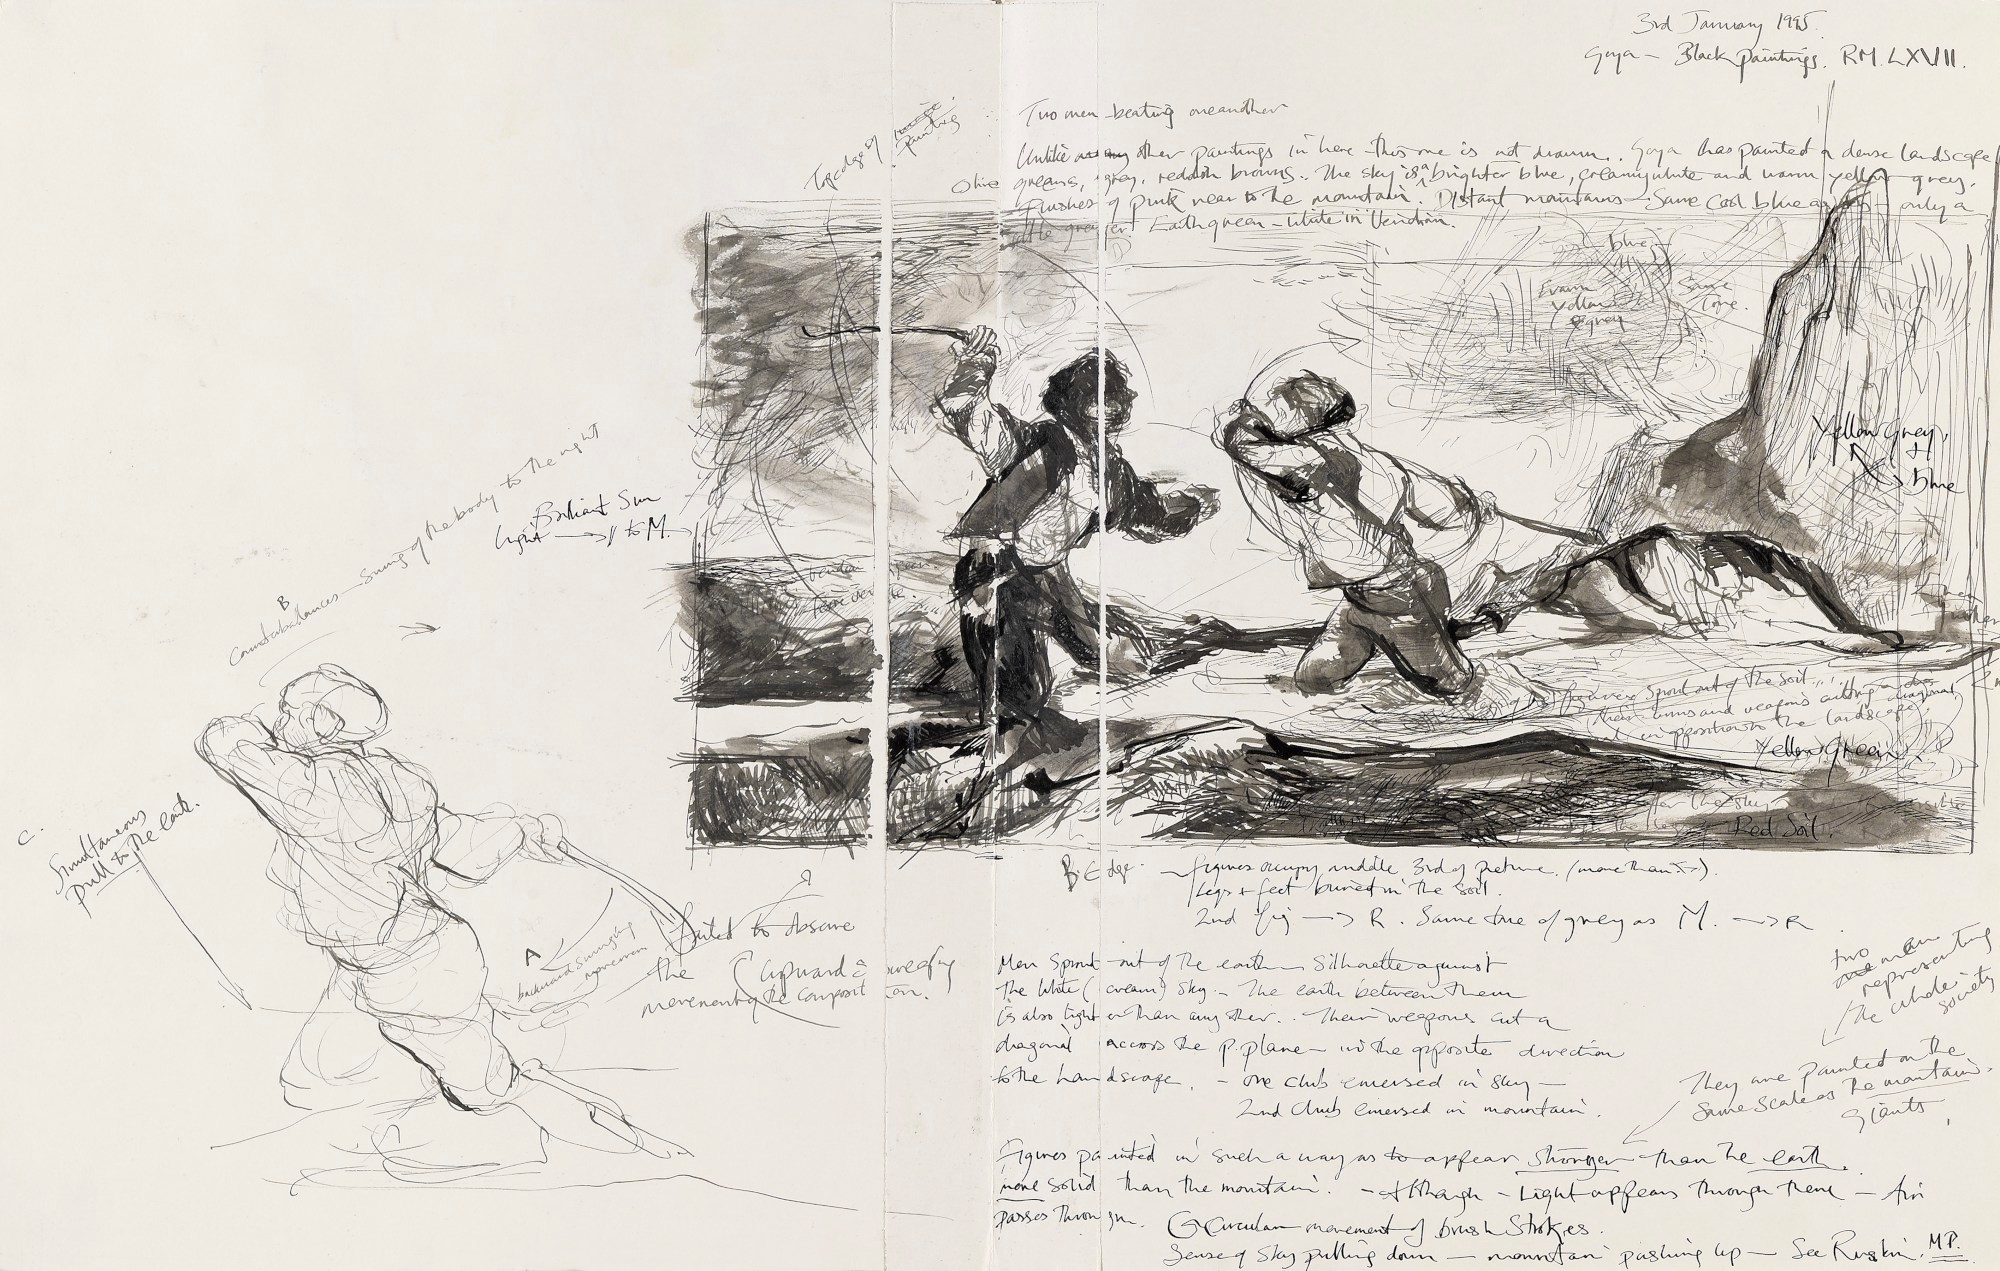 Sketch after Francisco Goya's 'Duel with Cudgels', 3 January 1995